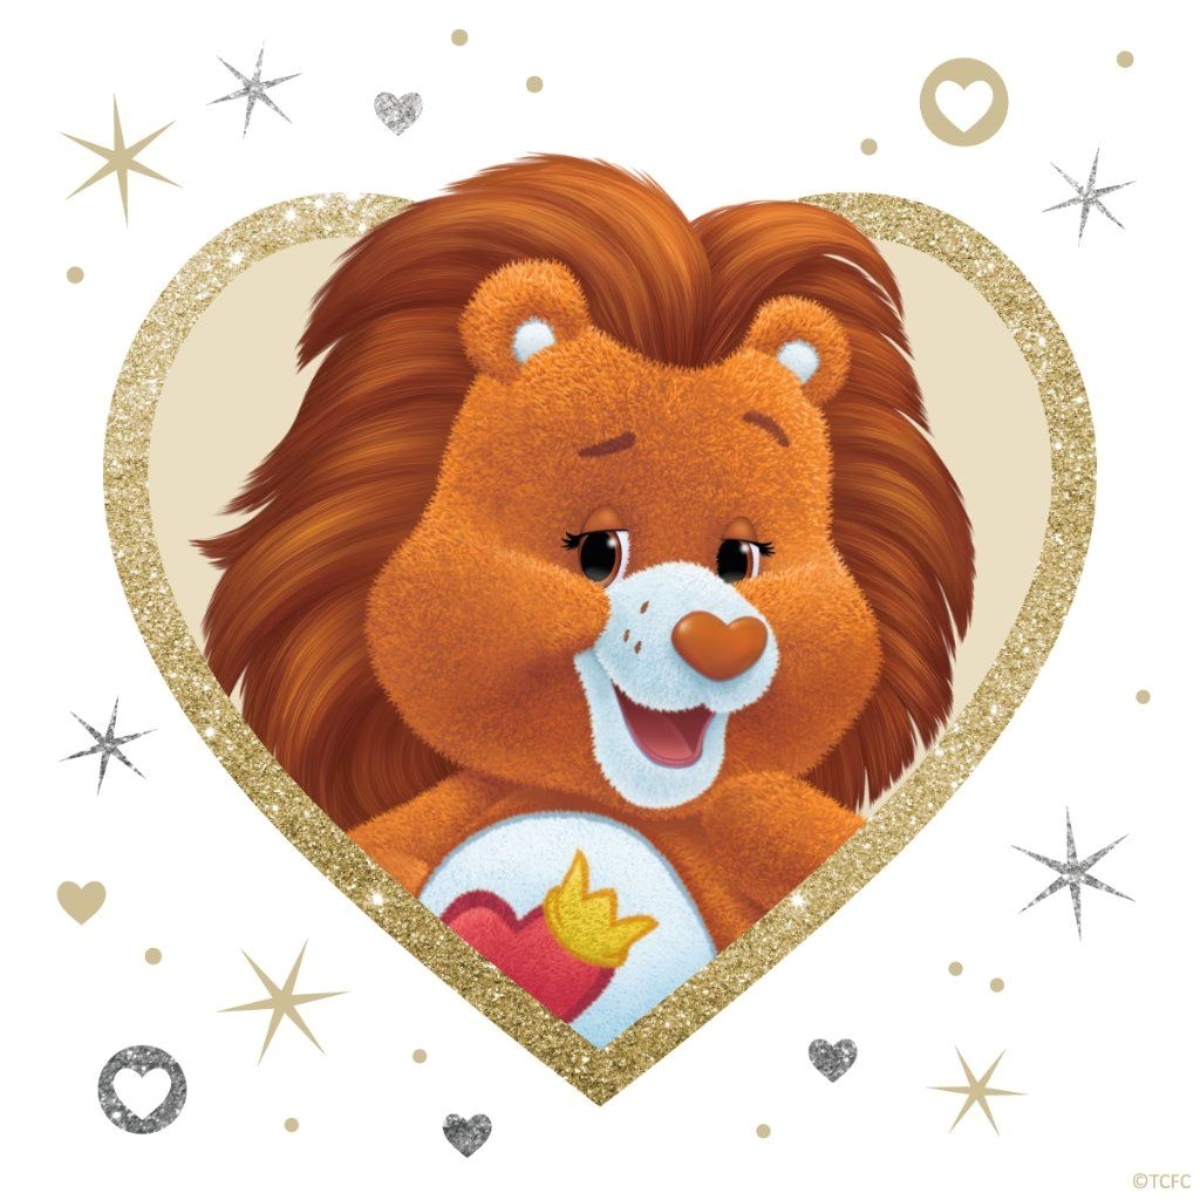 13-facts-about-brave-heart-lion-the-care-bears-family